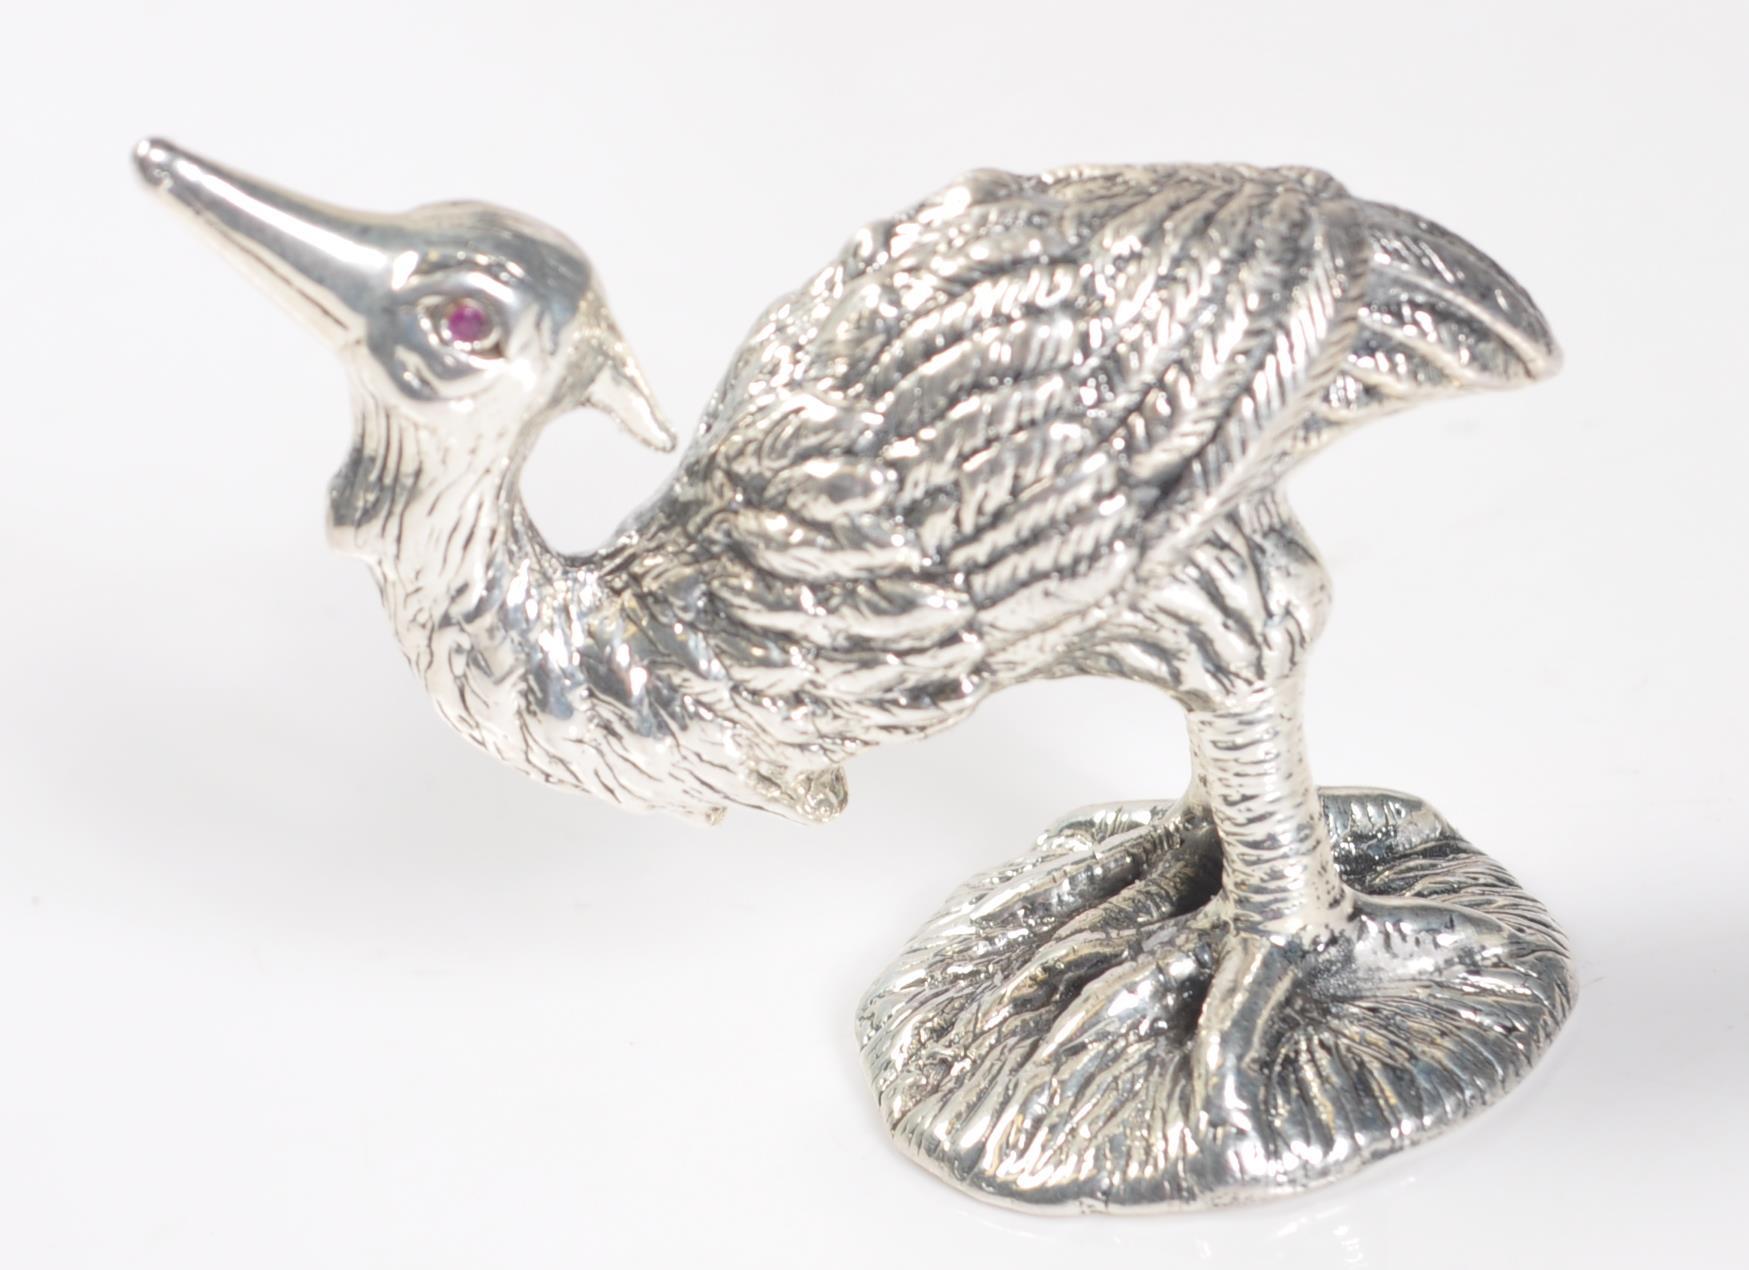 STAMPED 925 SILVER FIGURE OF A BIRD. - Image 2 of 5